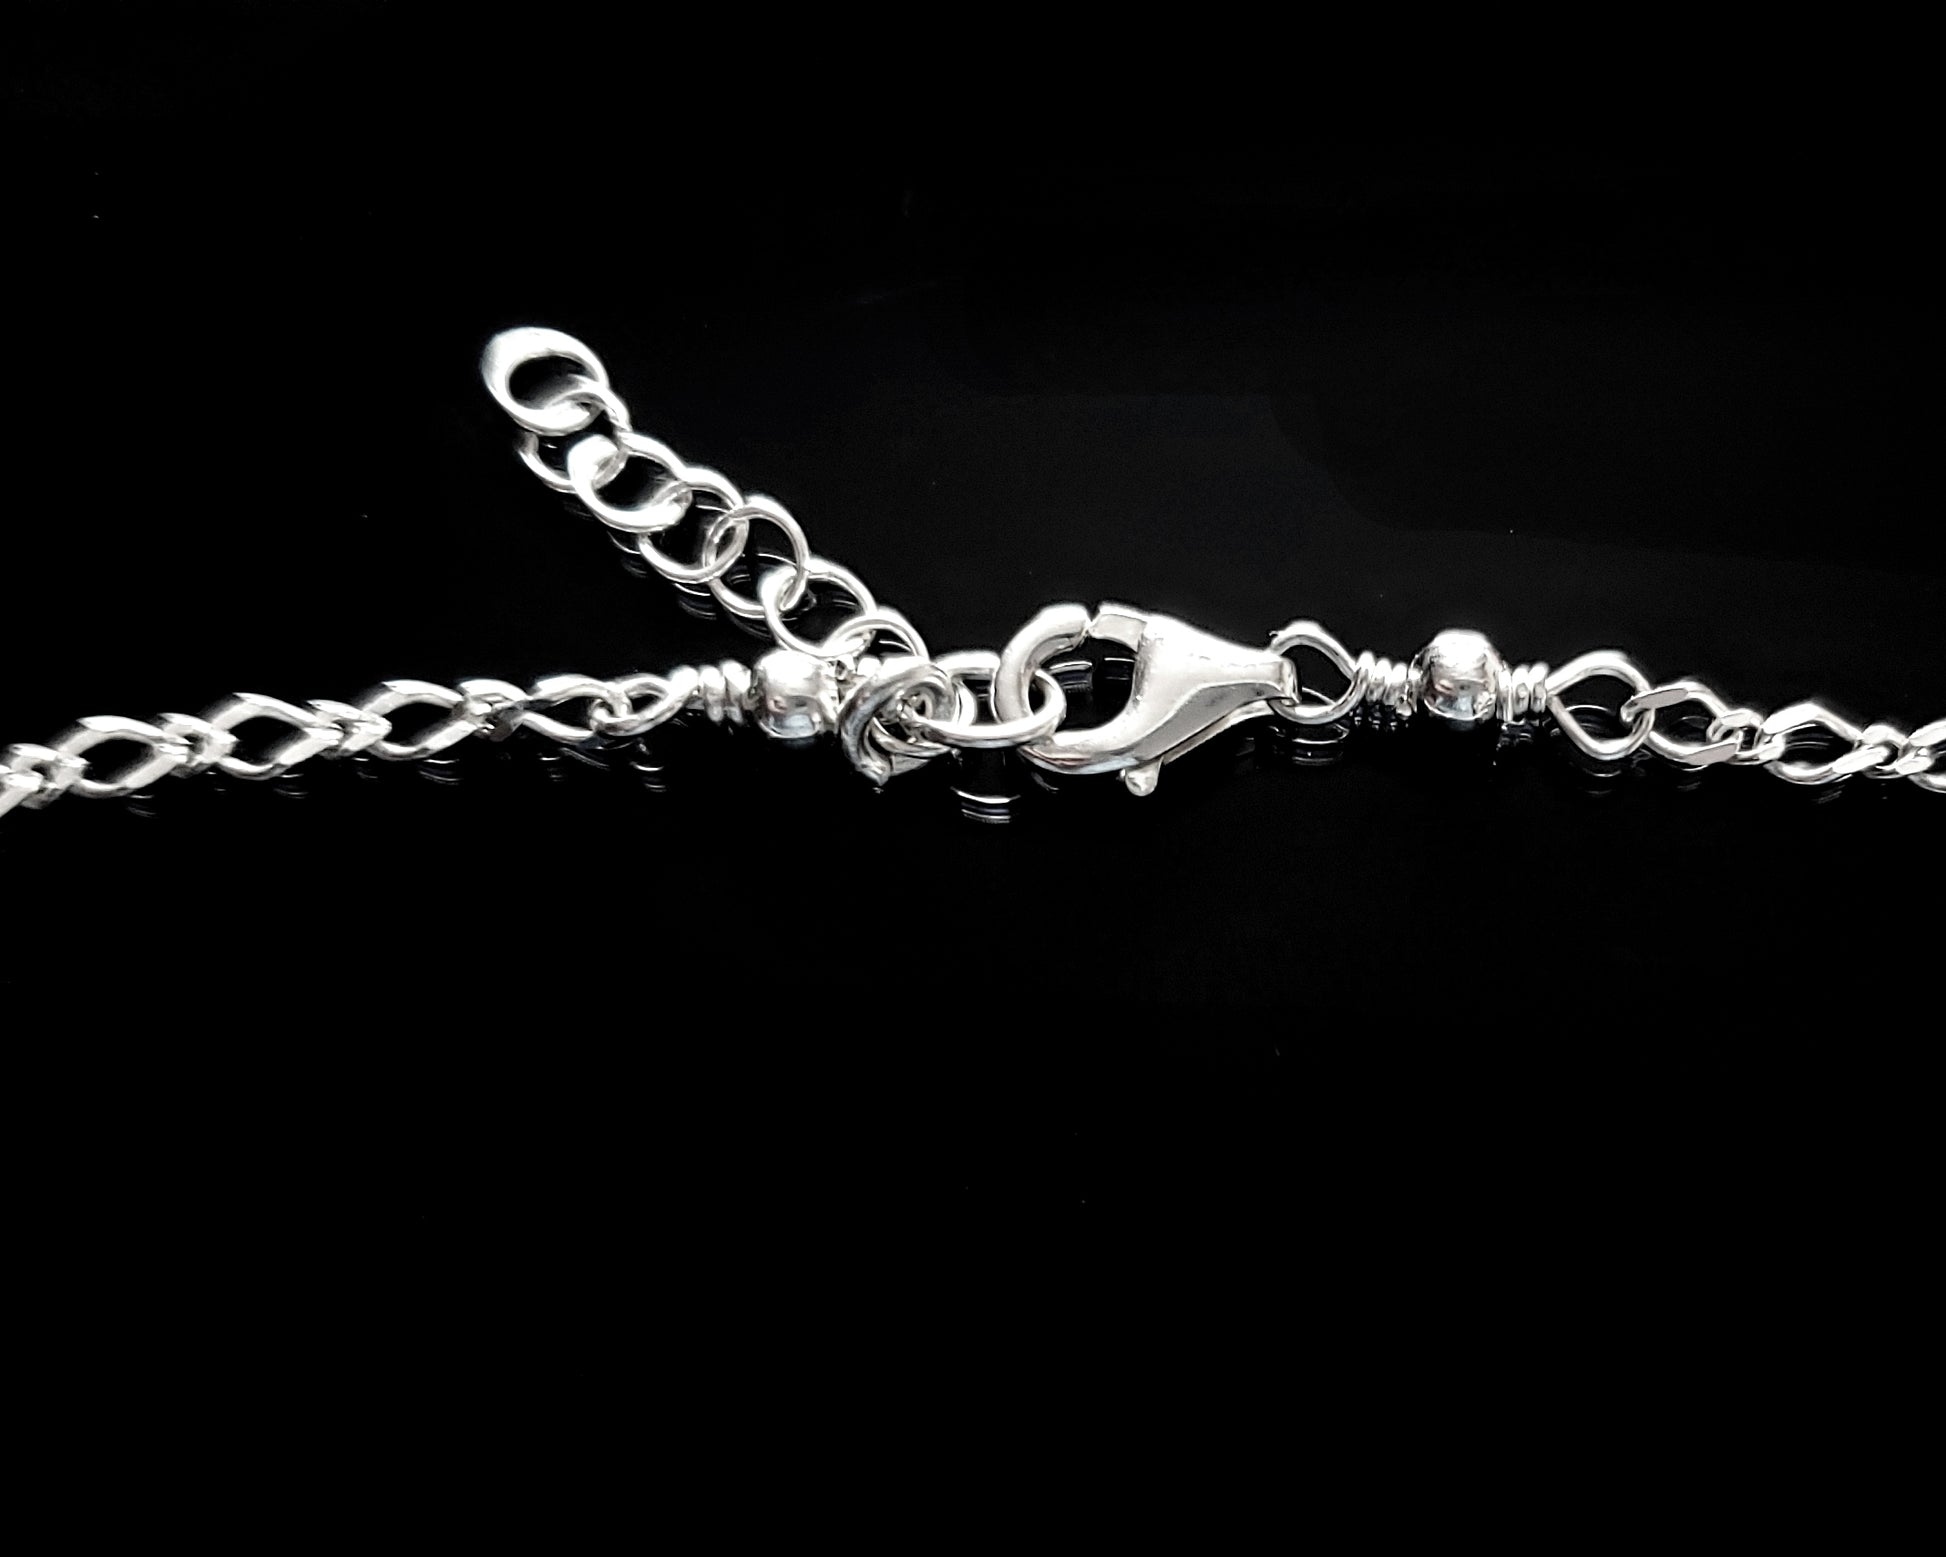 Cubic Zirconia Cross Ankle Bracelet / Anklet Handmade with Solid Sterling Silver, Minimalist Style Christian Anklet 